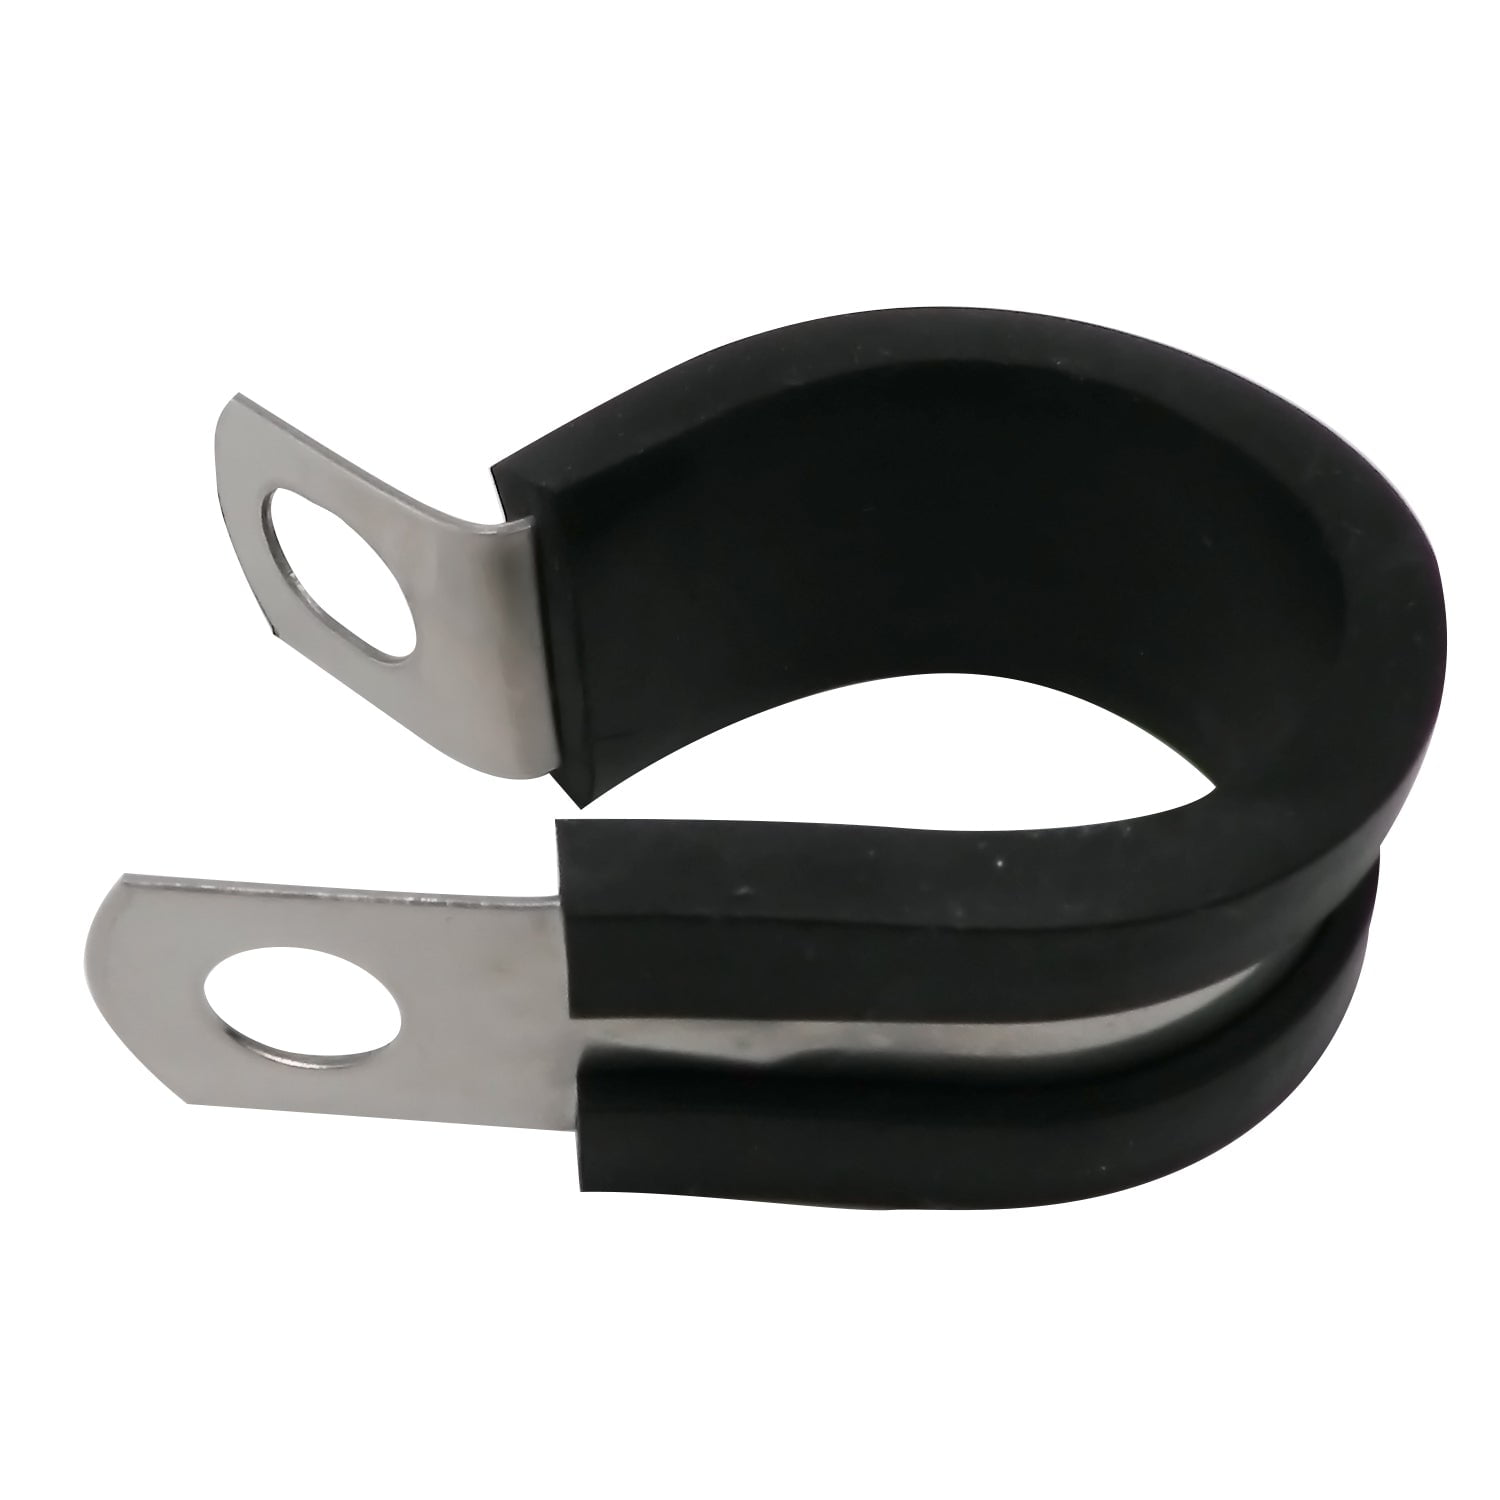 25 Marine Grade Stainless Steel Rubber-Lined P-Clip 13mm Hose Pipe Clamp M6 Hole 